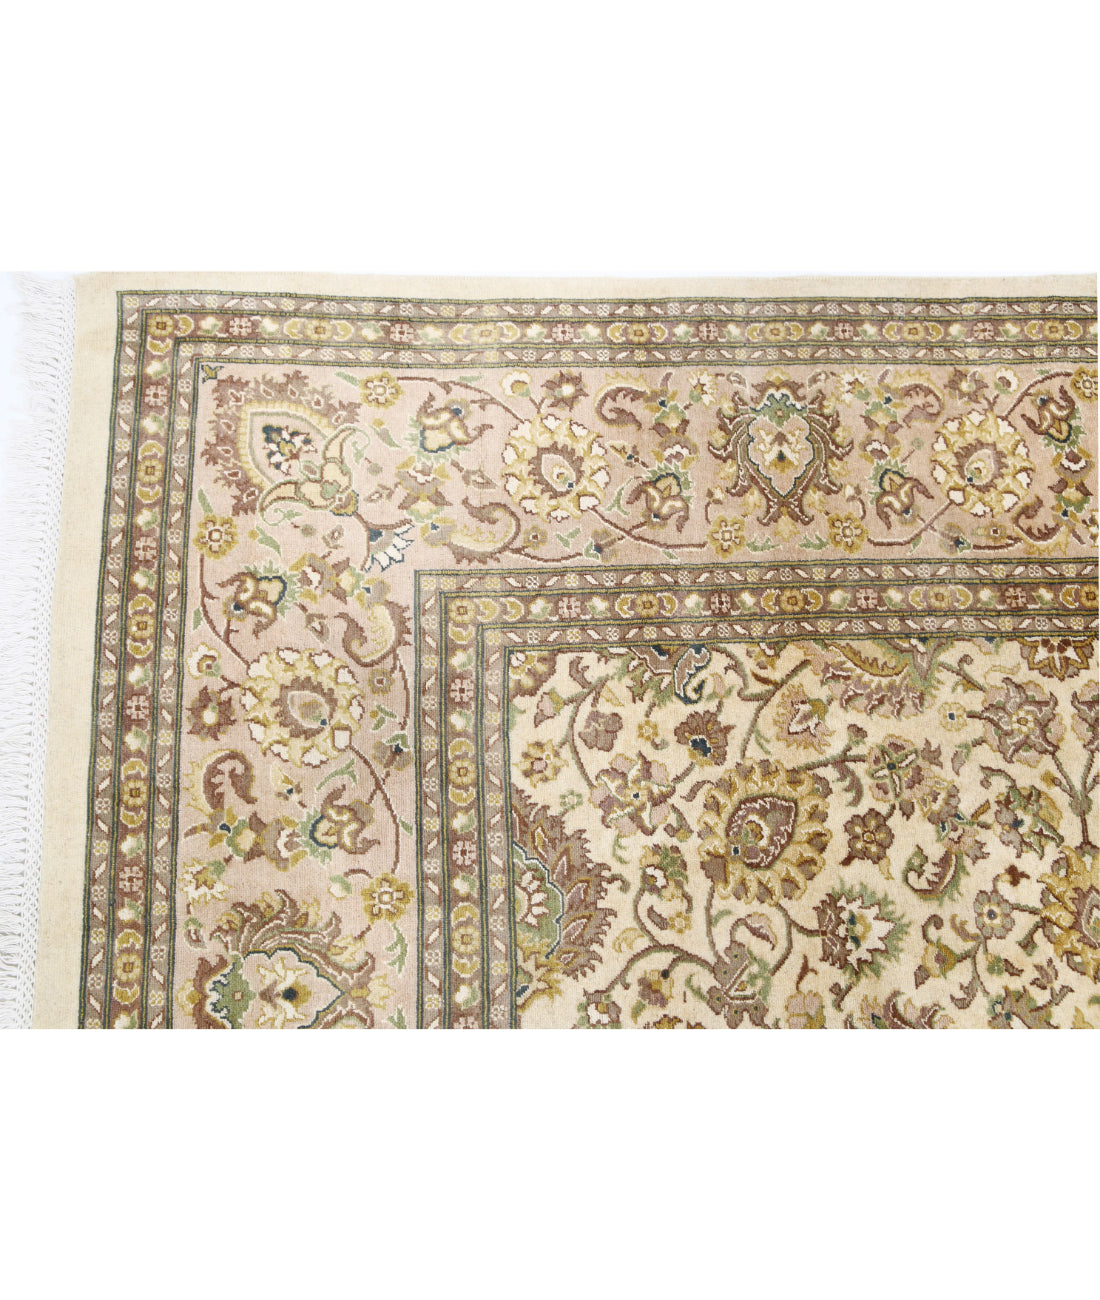 Hand Knotted Heritage Persian Style Wool Rug - 8'1'' x 10'1'' 8'1'' x 10'1'' (243 X 303) / Beige / Taupe